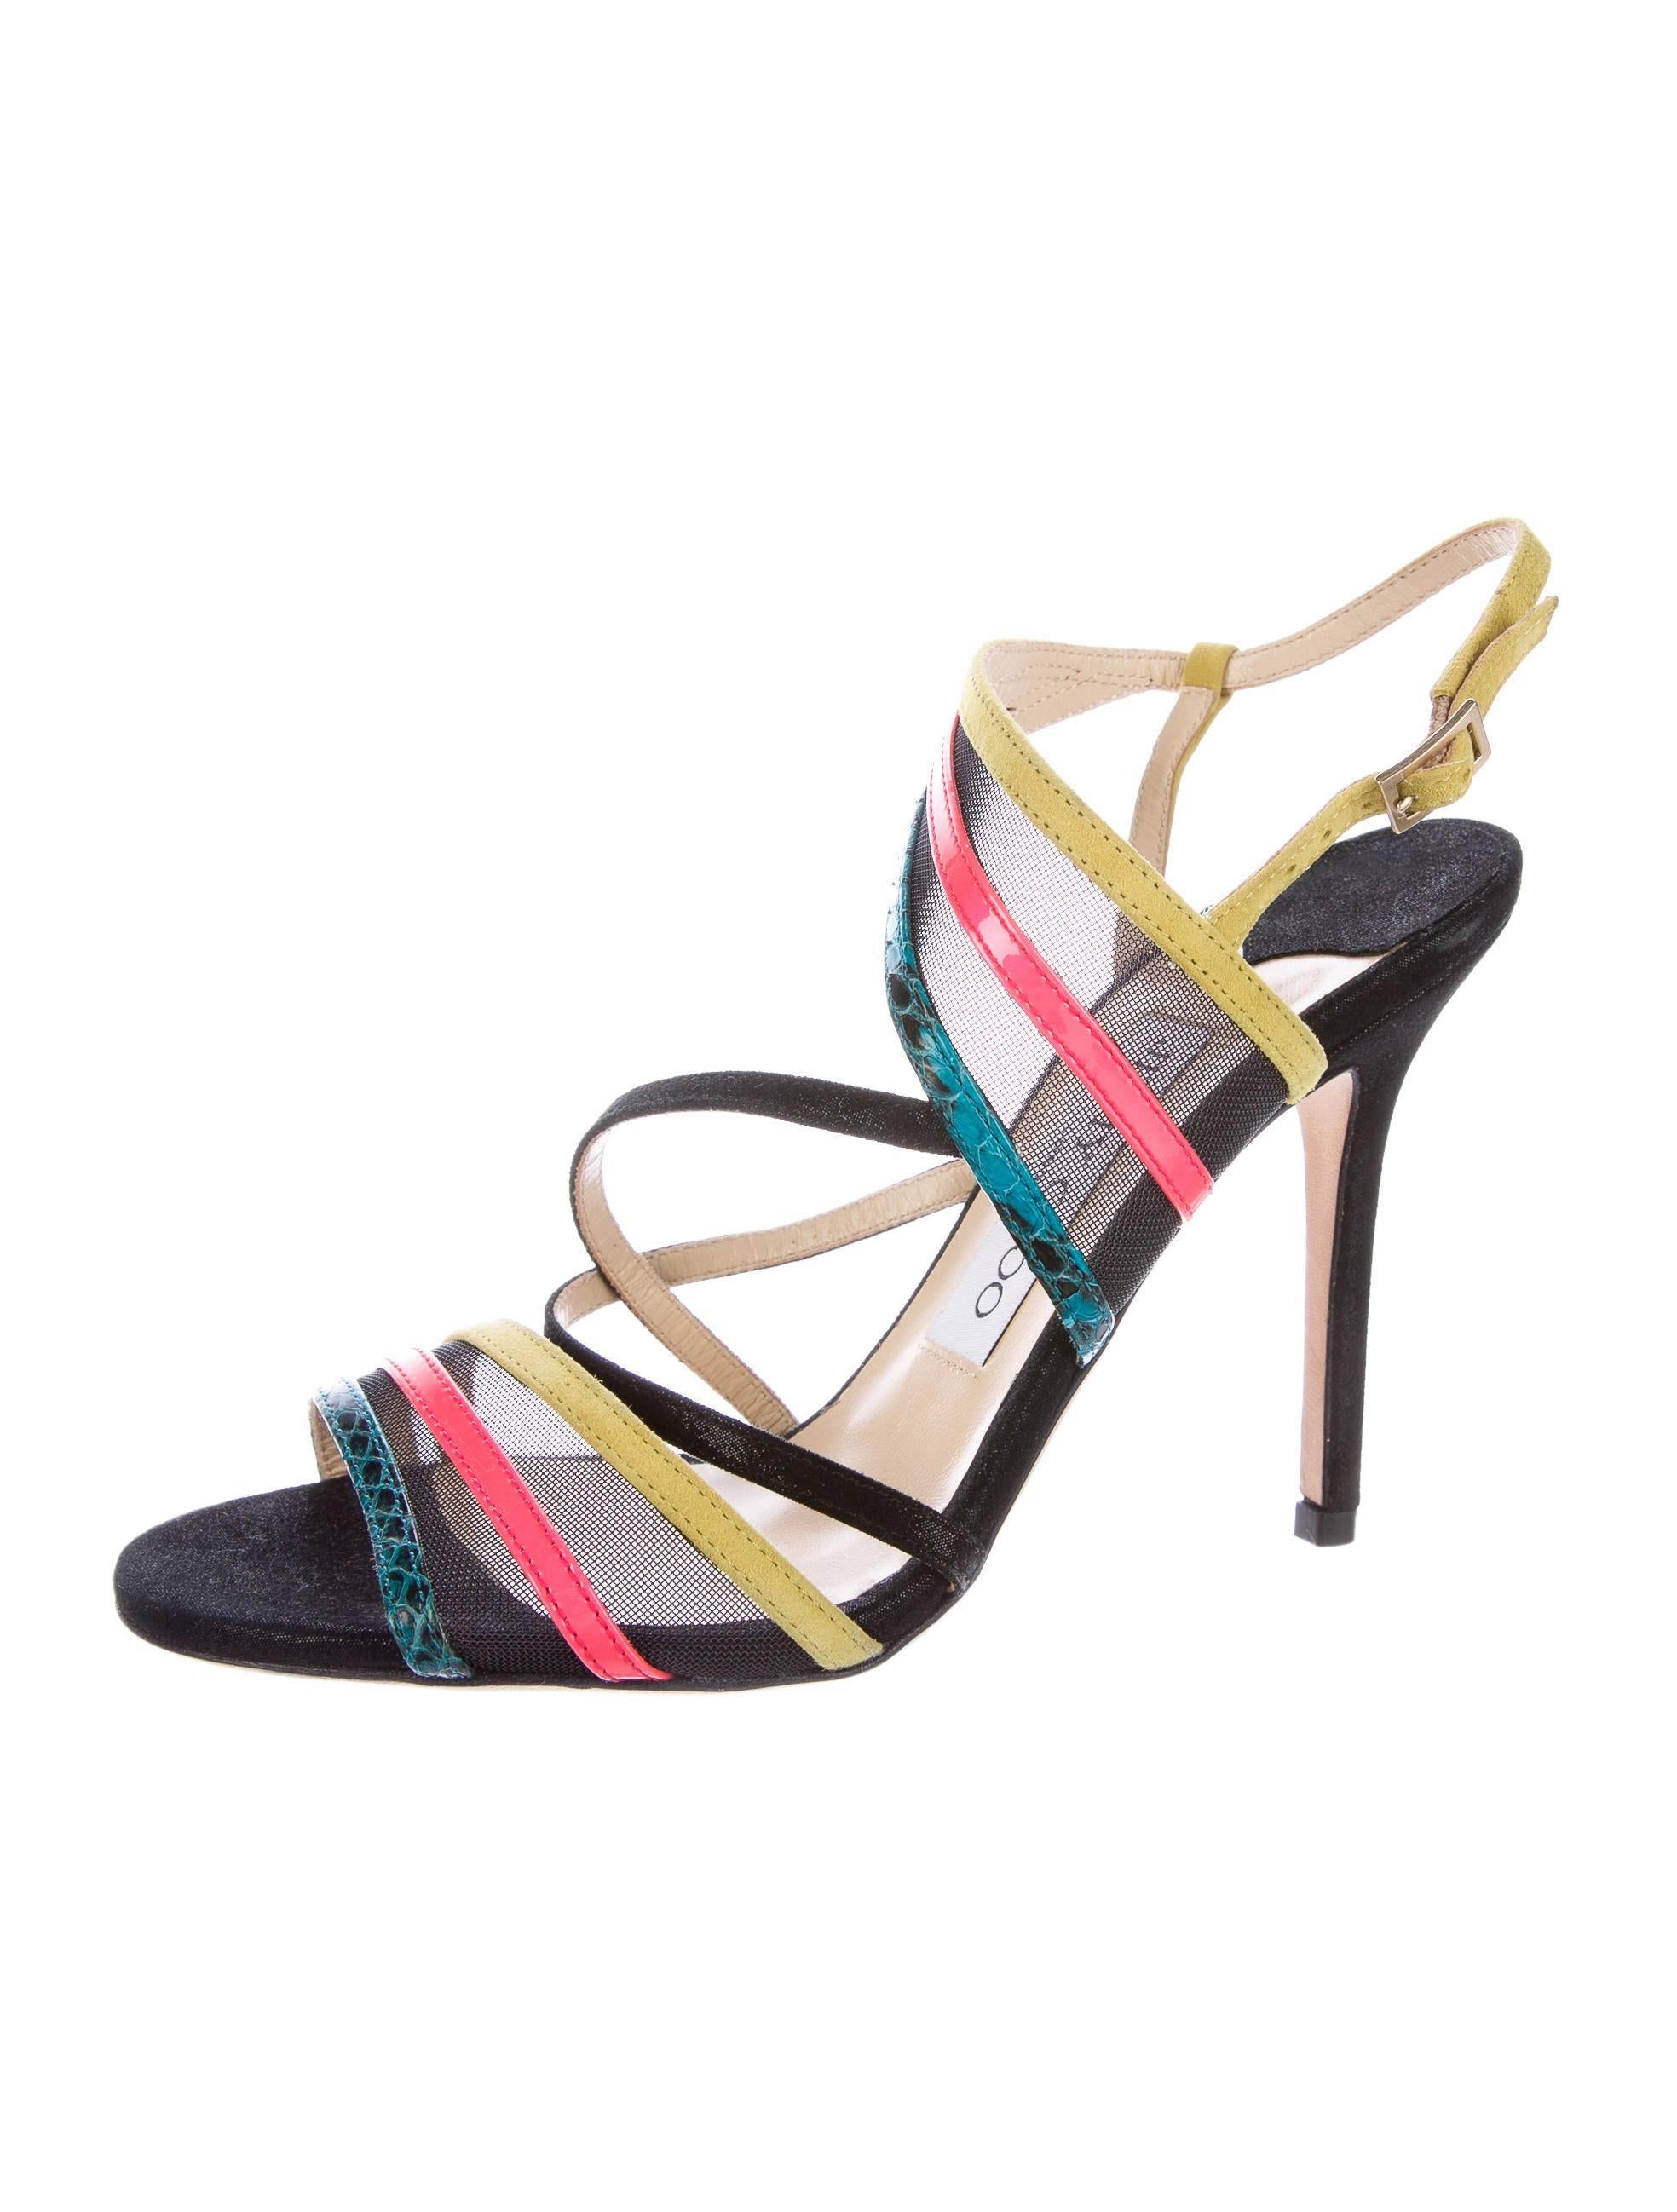 CURATOR'S NOTES

Jimmy Choo NEW Multi Color Mesh Suede Evening Sandals Heels  

Size IT 36
Suede
Mesh
Gold tone hardware
Ankle strap closure
Made in Italy
Heel height 4.25